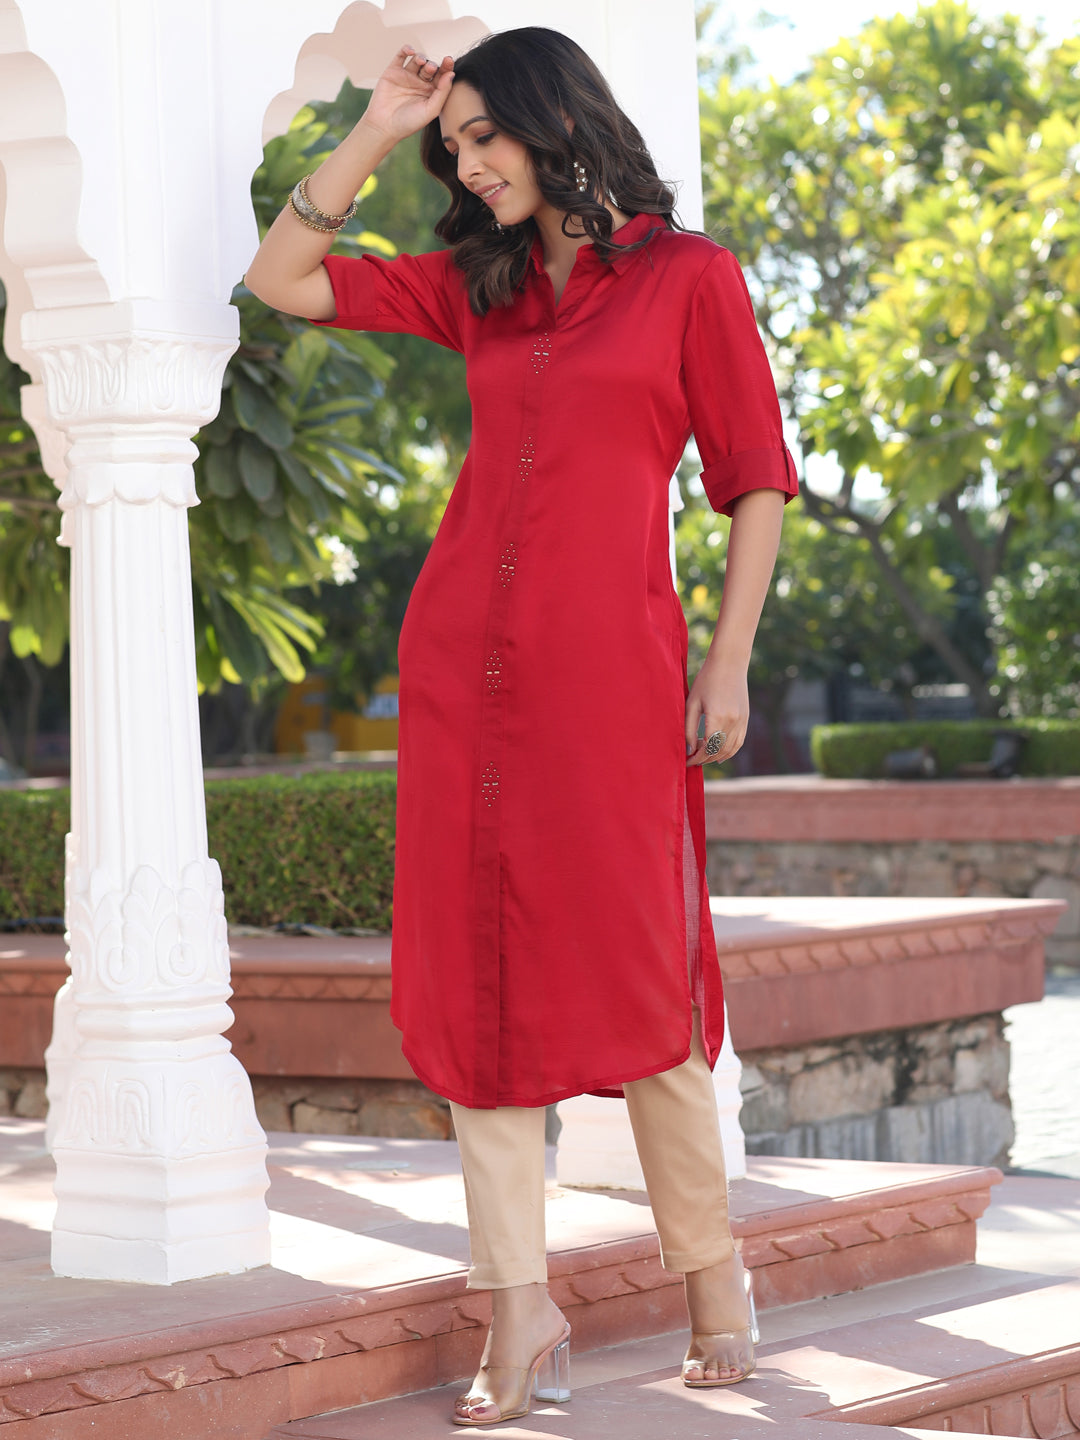 A Red Silk Fabric Embellished Shirt With Roll-Up Elbow Sleeves